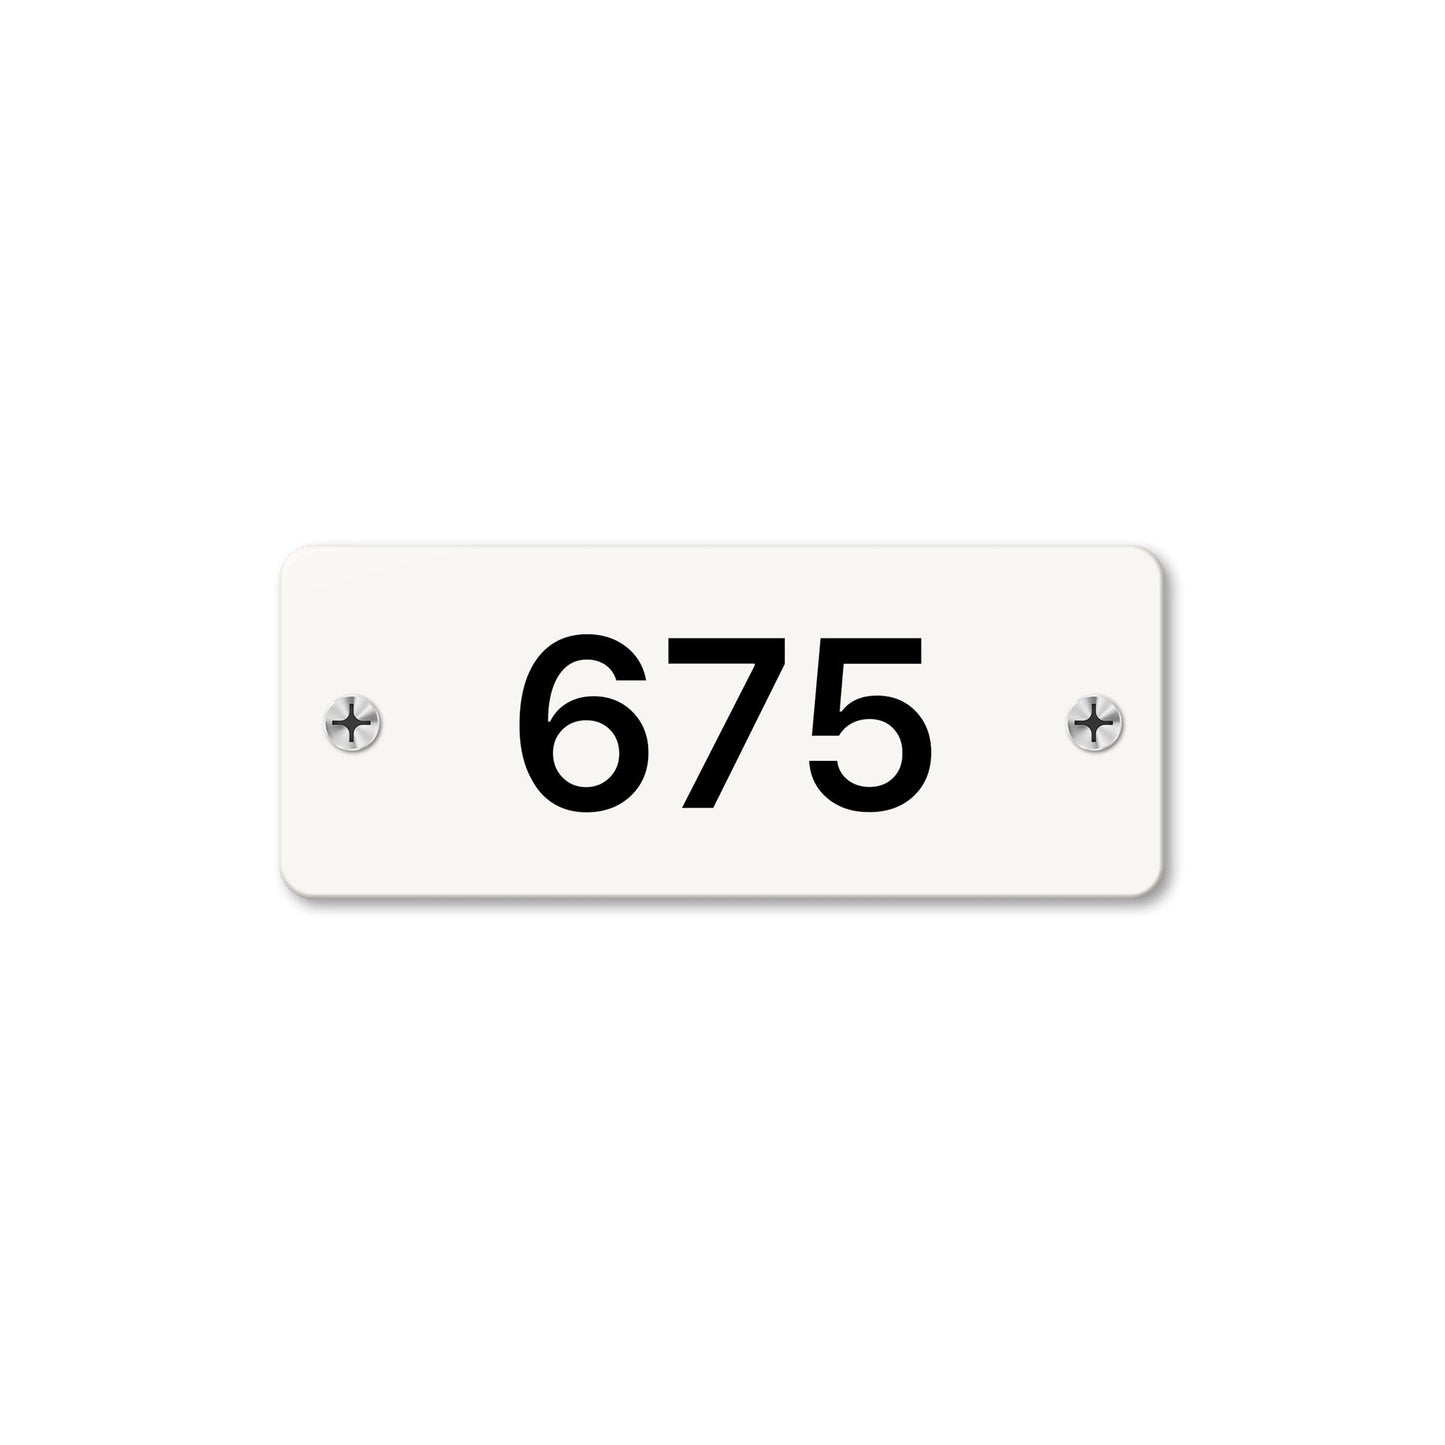 Numeral 675